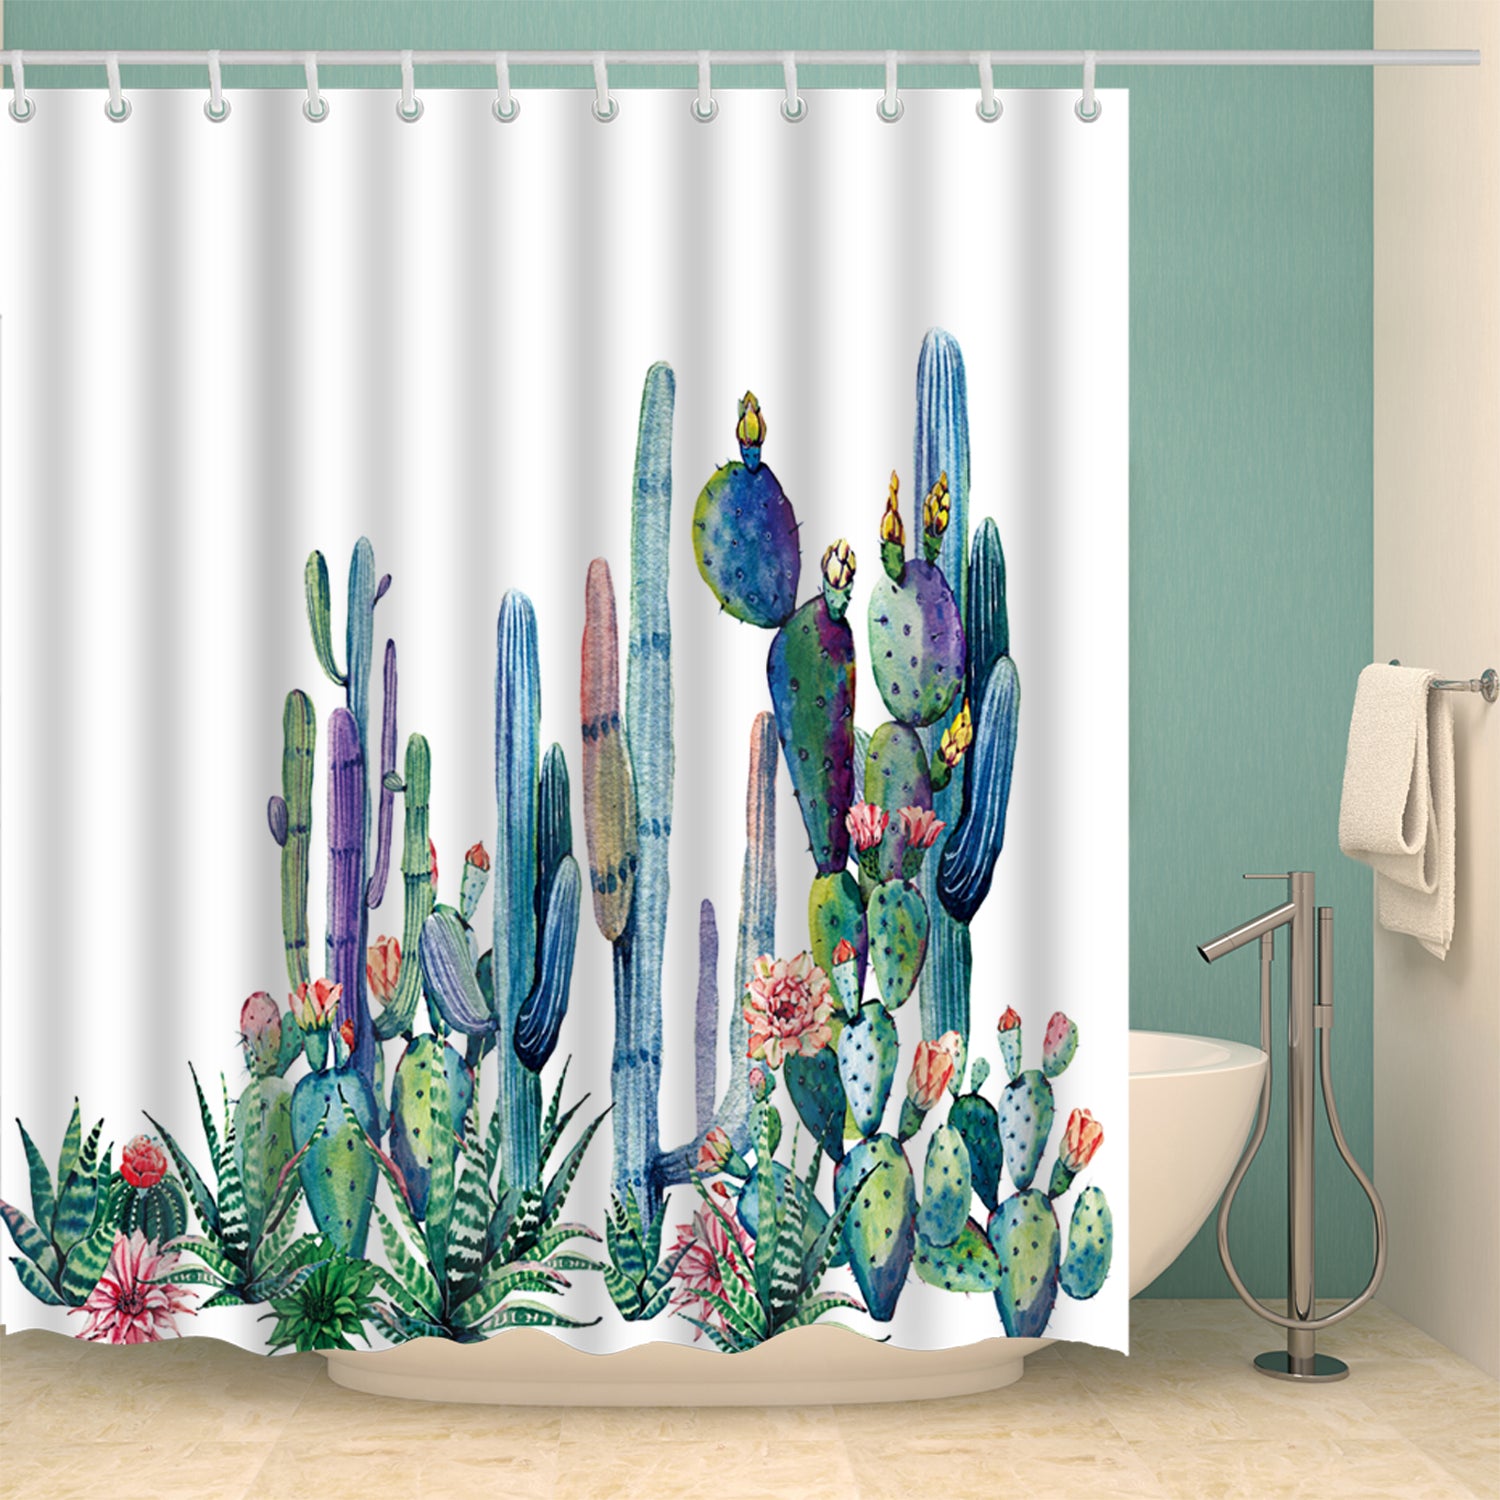 Clear and Nature Saguaro Cactus Shower Curtain